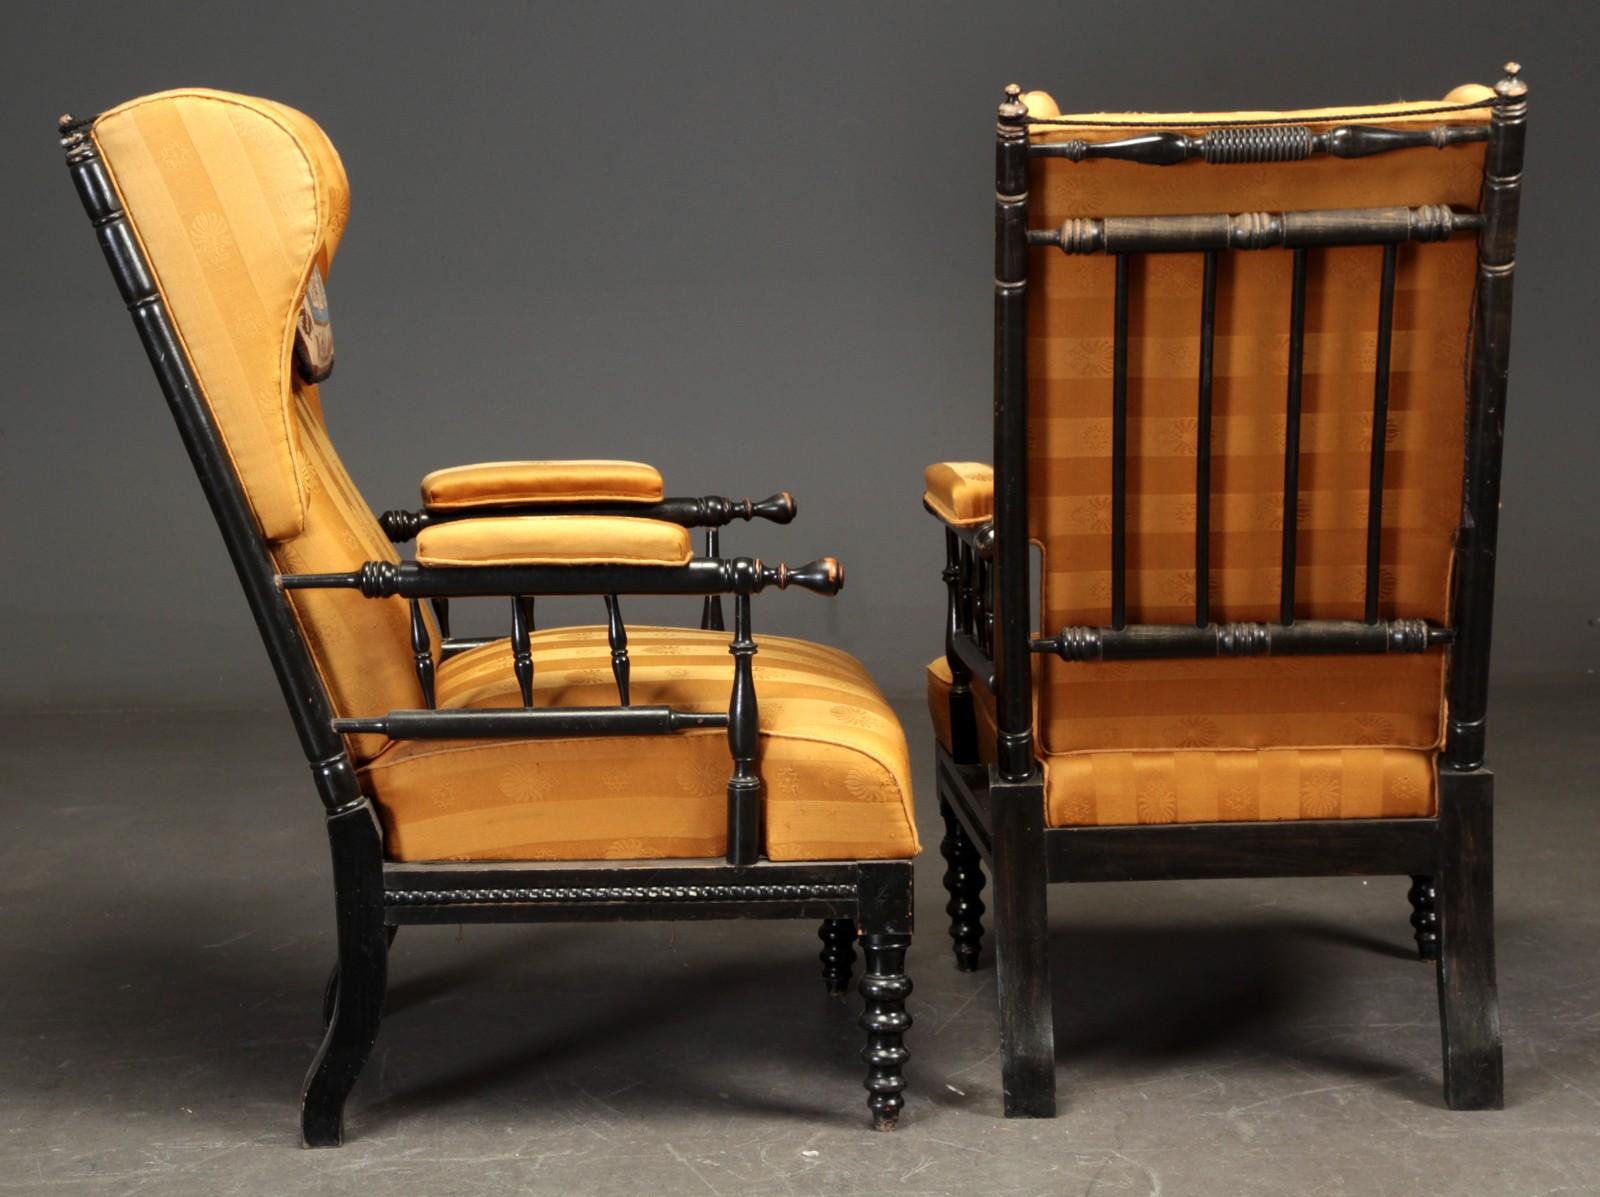 Pair of aesthetic period wingback armchairs. Black painted wooden frame, carved back splats lightly decorated, late 19th century. Upholstered in striped yellow fabric. A petit-point headrest accompanies each chair.